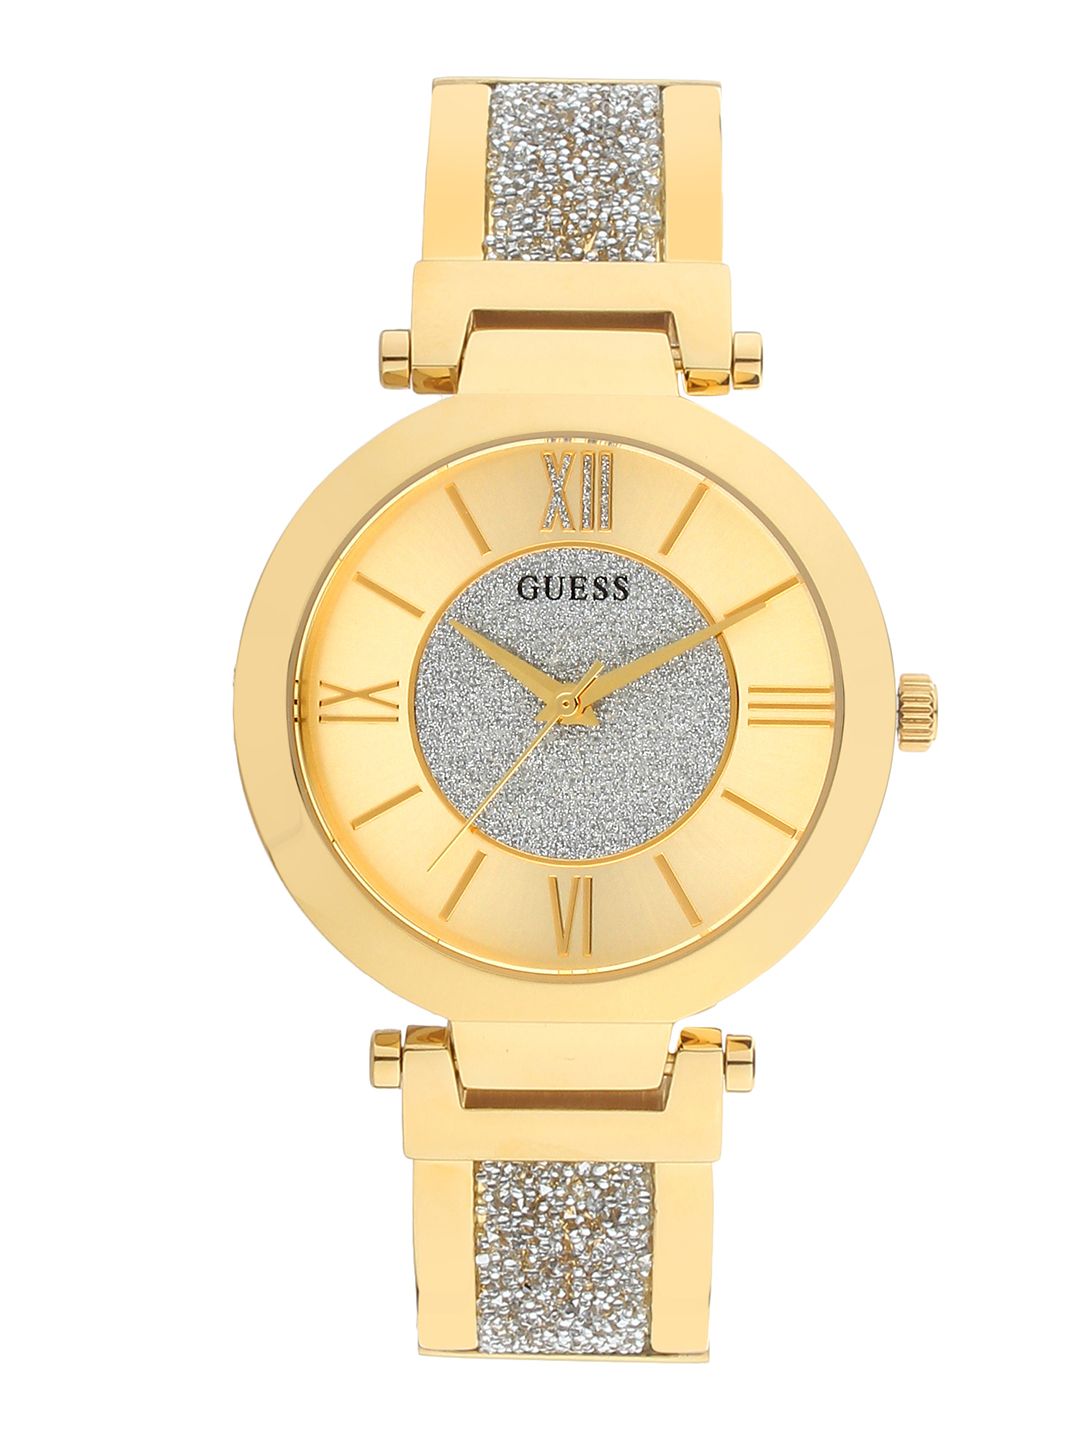 GUESS Women Champagne Analogue Watch W1288L2 Price in India